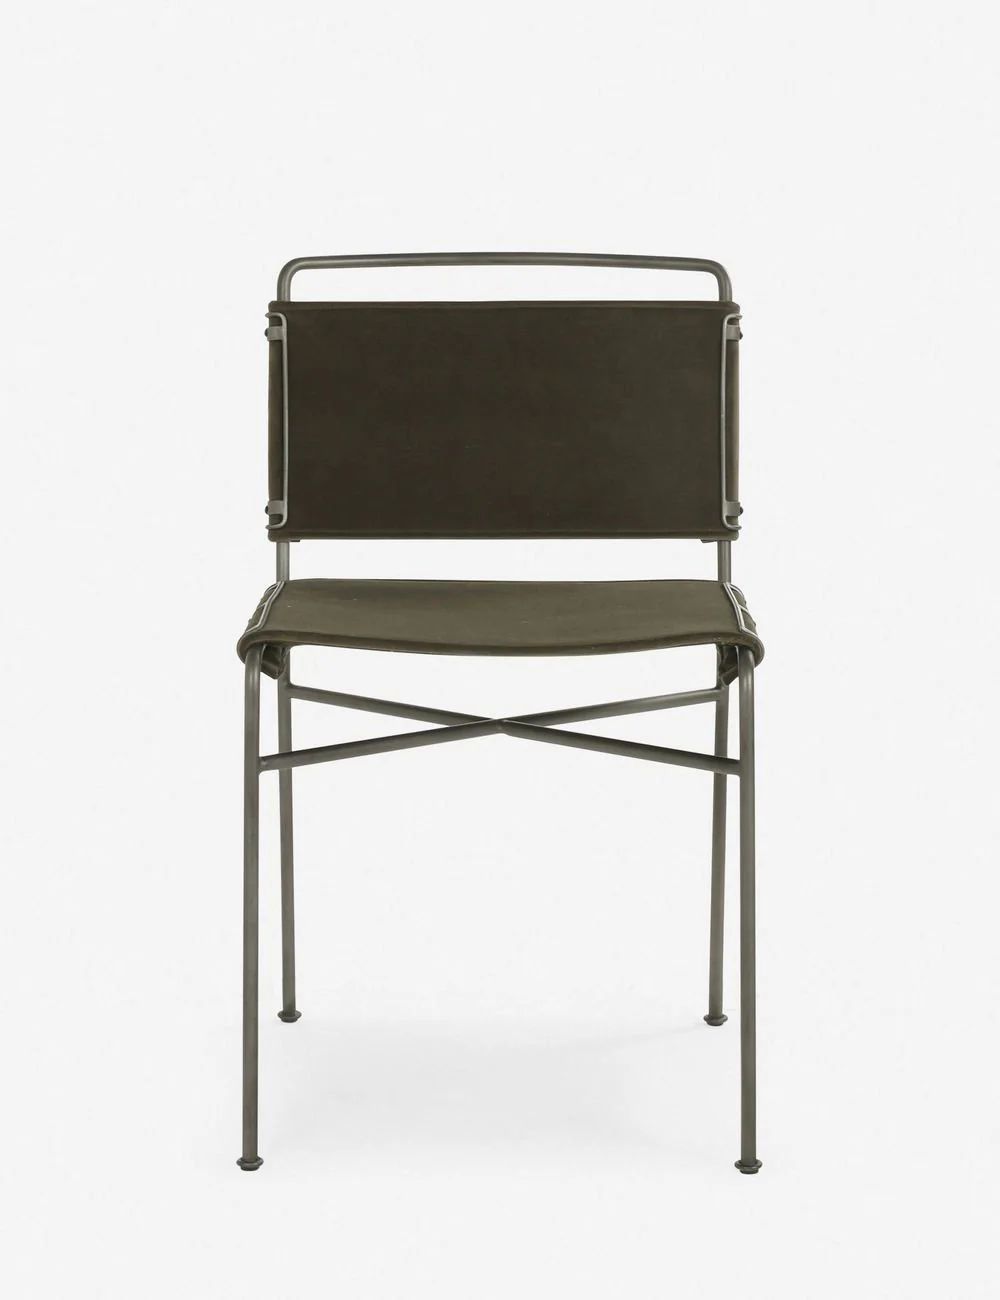 Trysta Dining Chair, Olive | Lulu and Georgia 